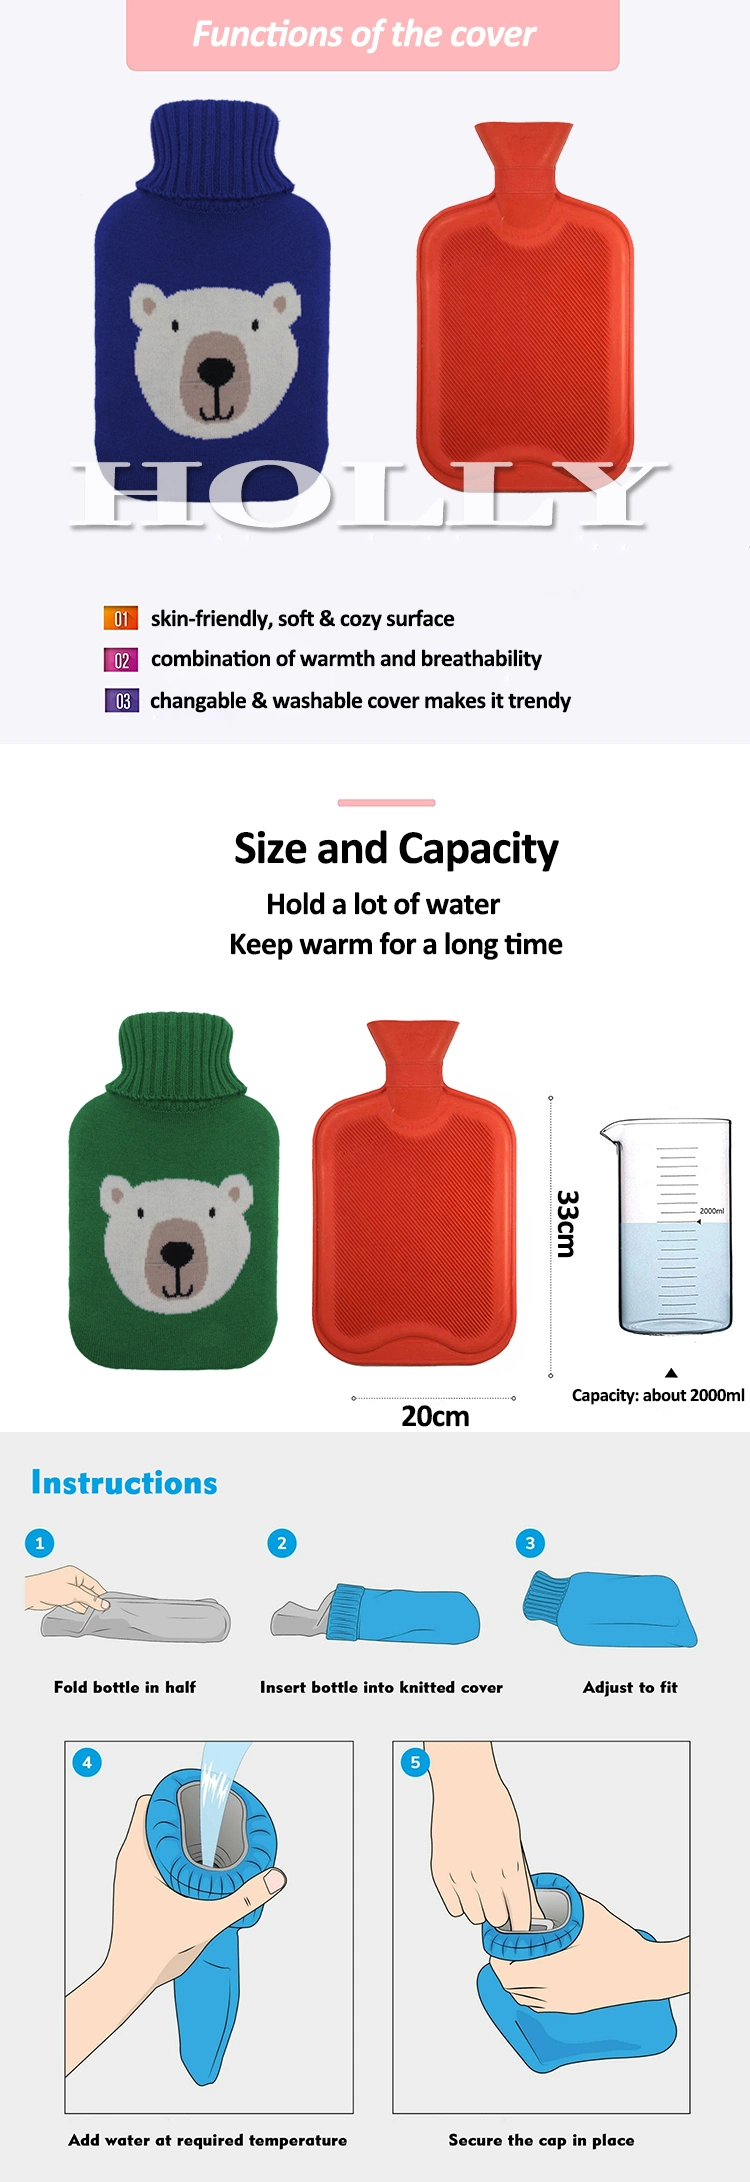 New Design 2000ml Rubber Hot Water Bag with Amazon Custom Knit Cover